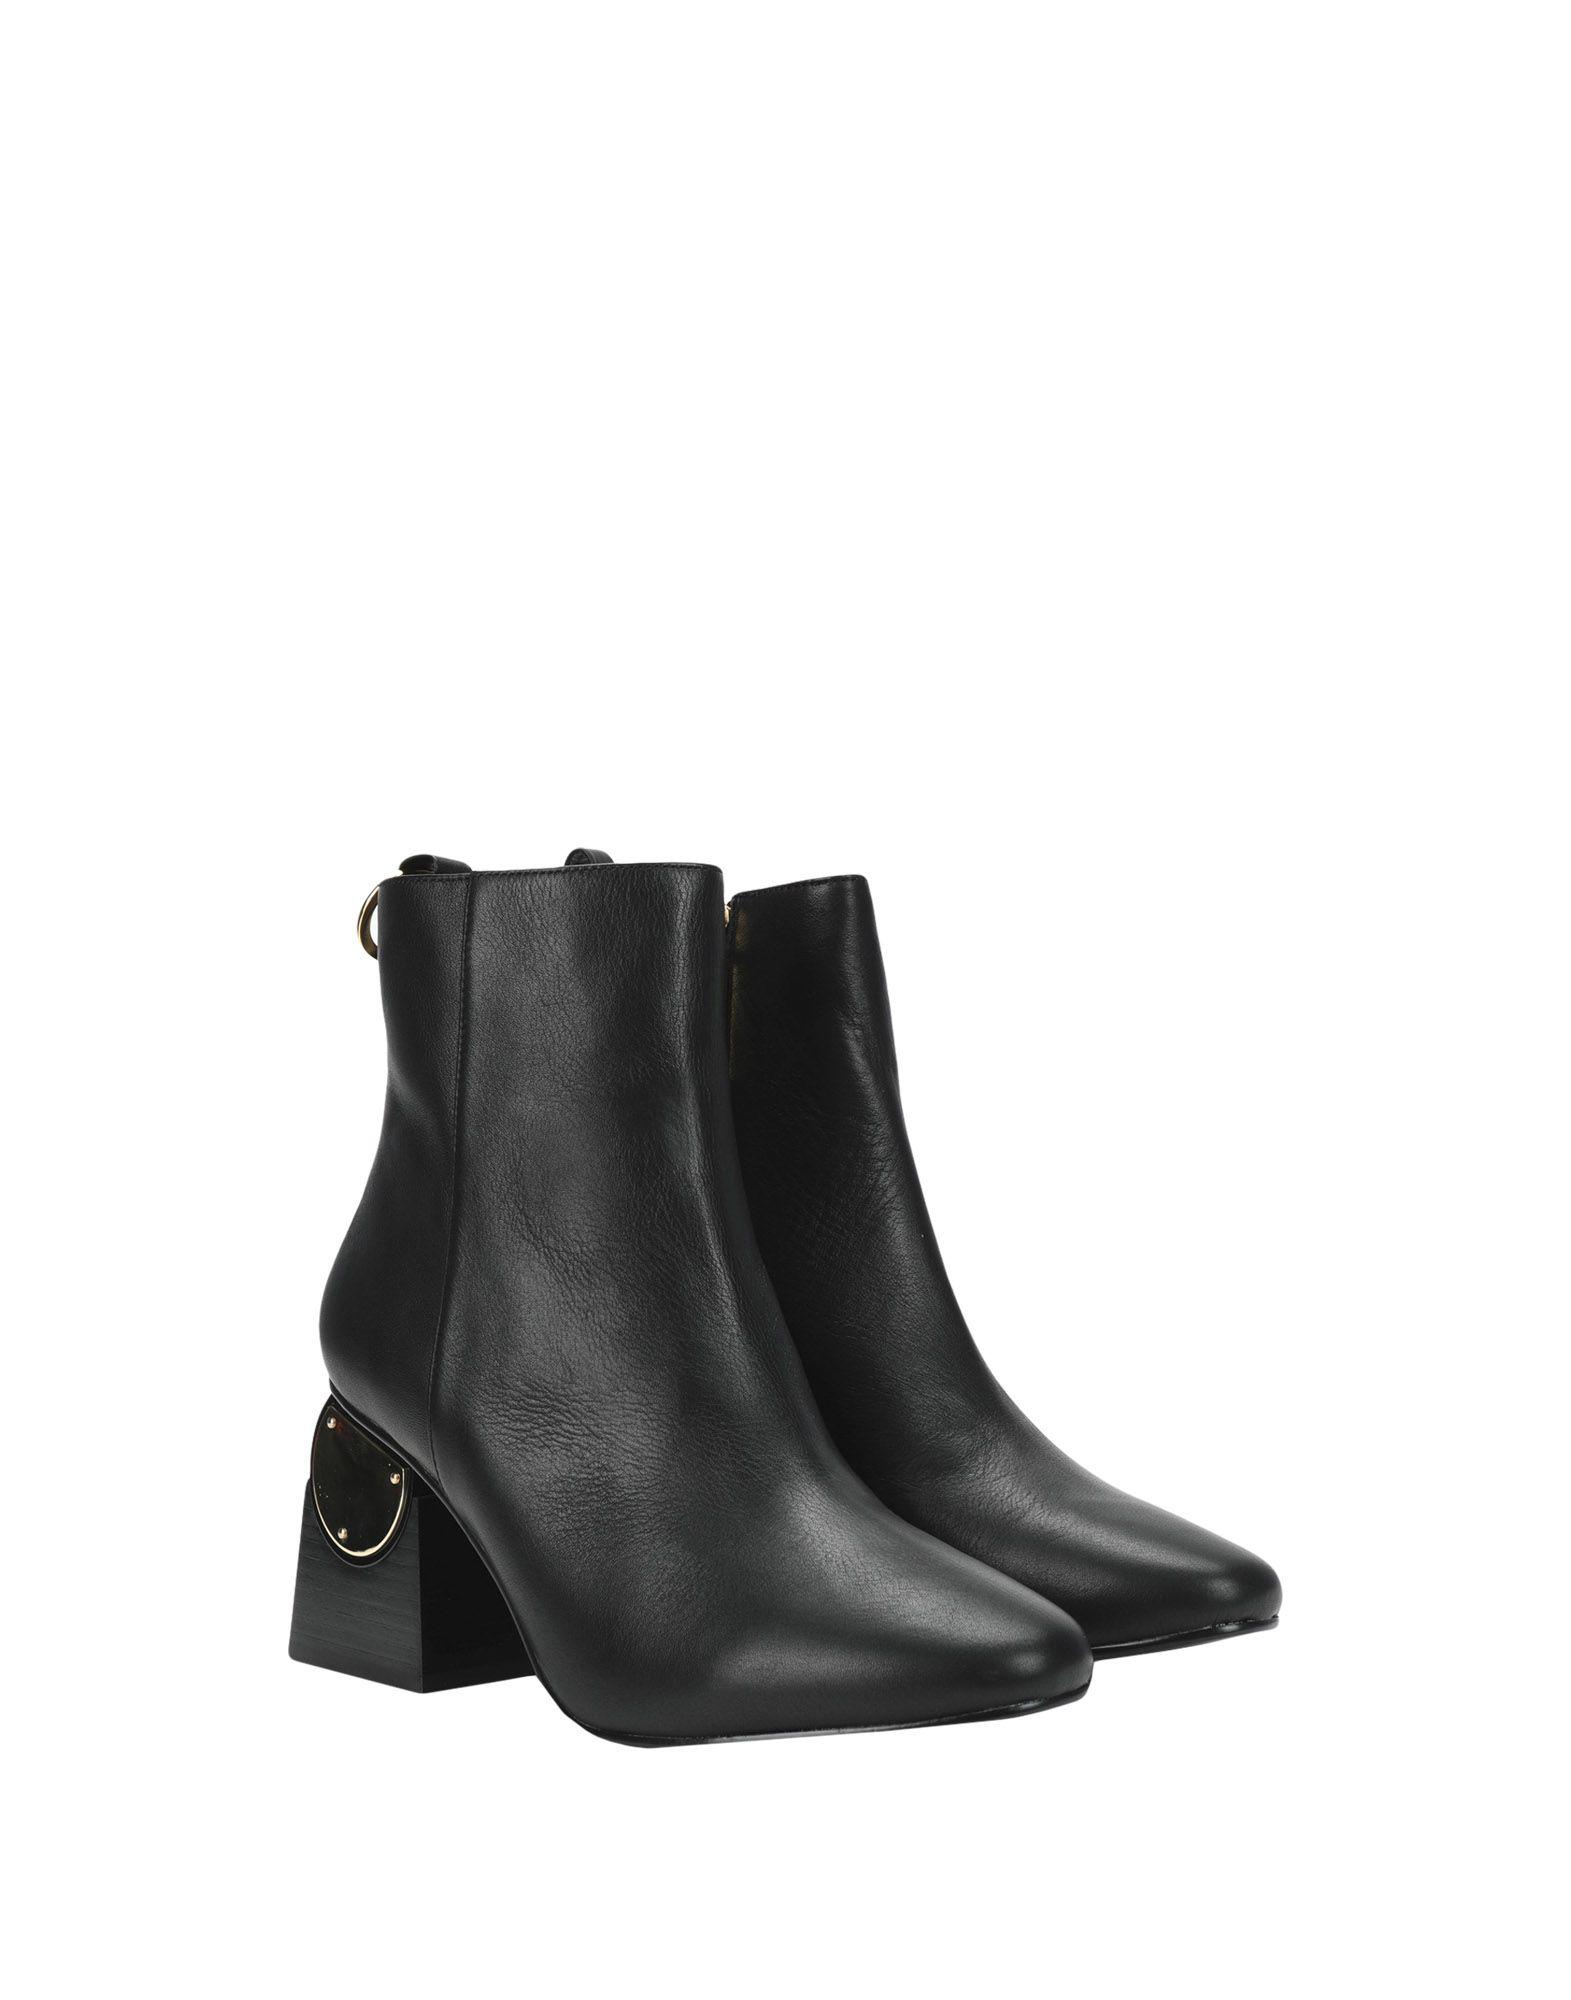 Kat Maconie Leather Ankle Boots in Black - Save 50% - Lyst